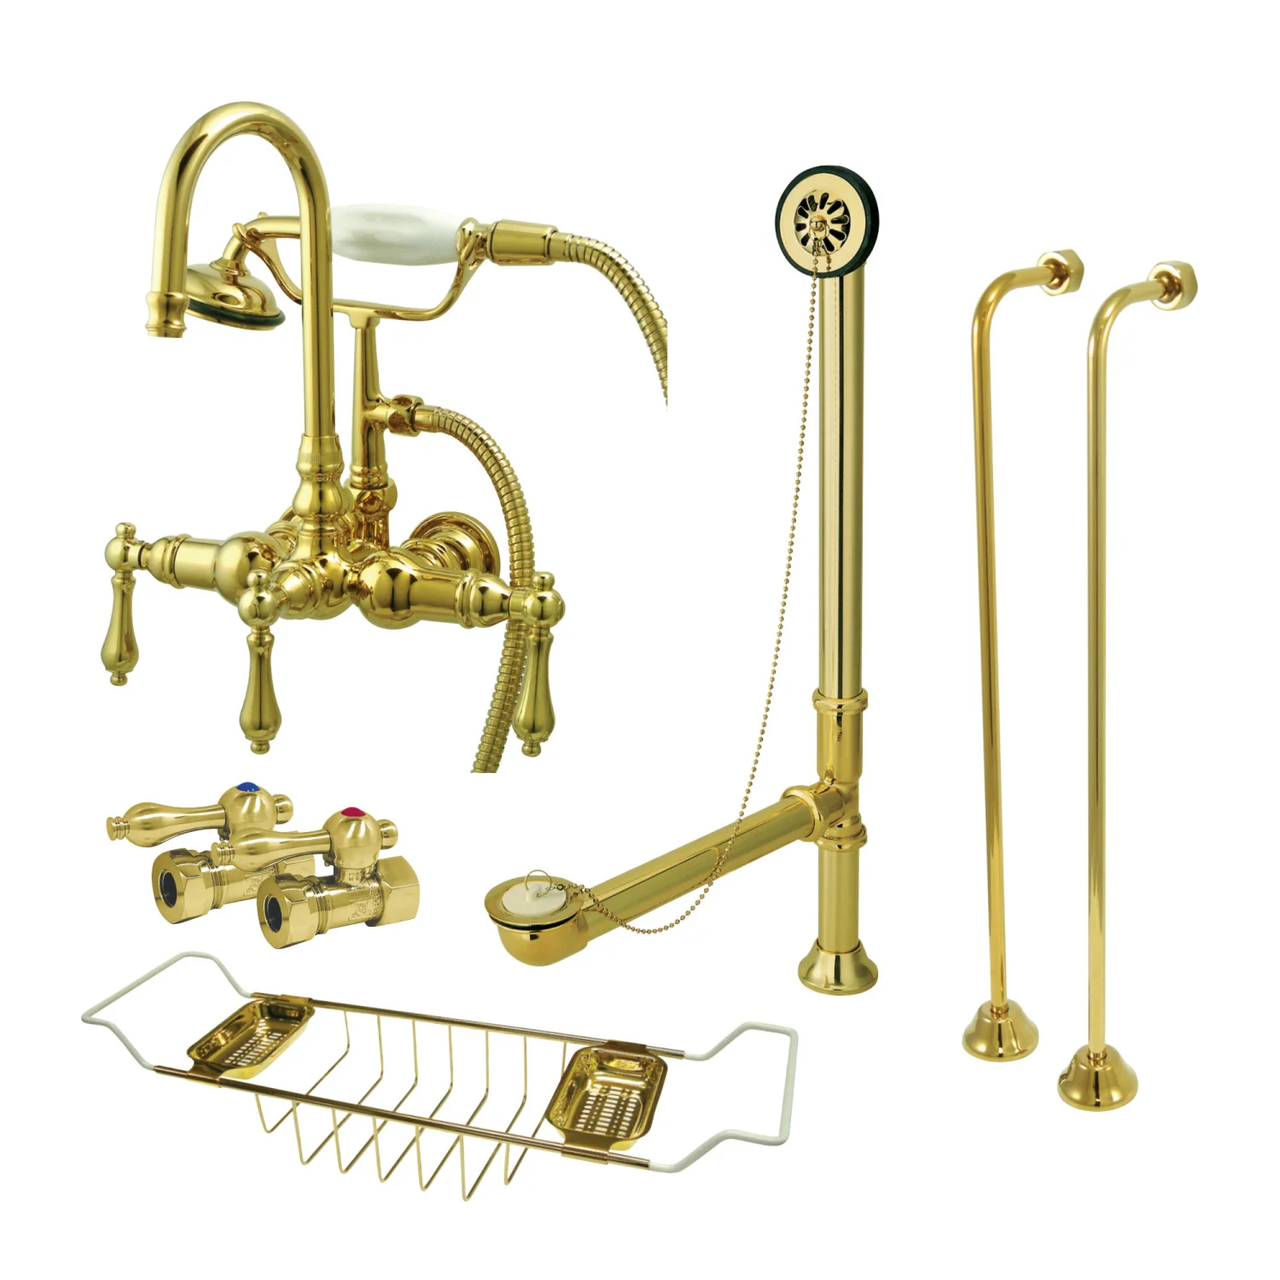 Kingston Brass Vintage Wall Mount Clawfoot Tub Faucet Package with Supply Line - BNGBath